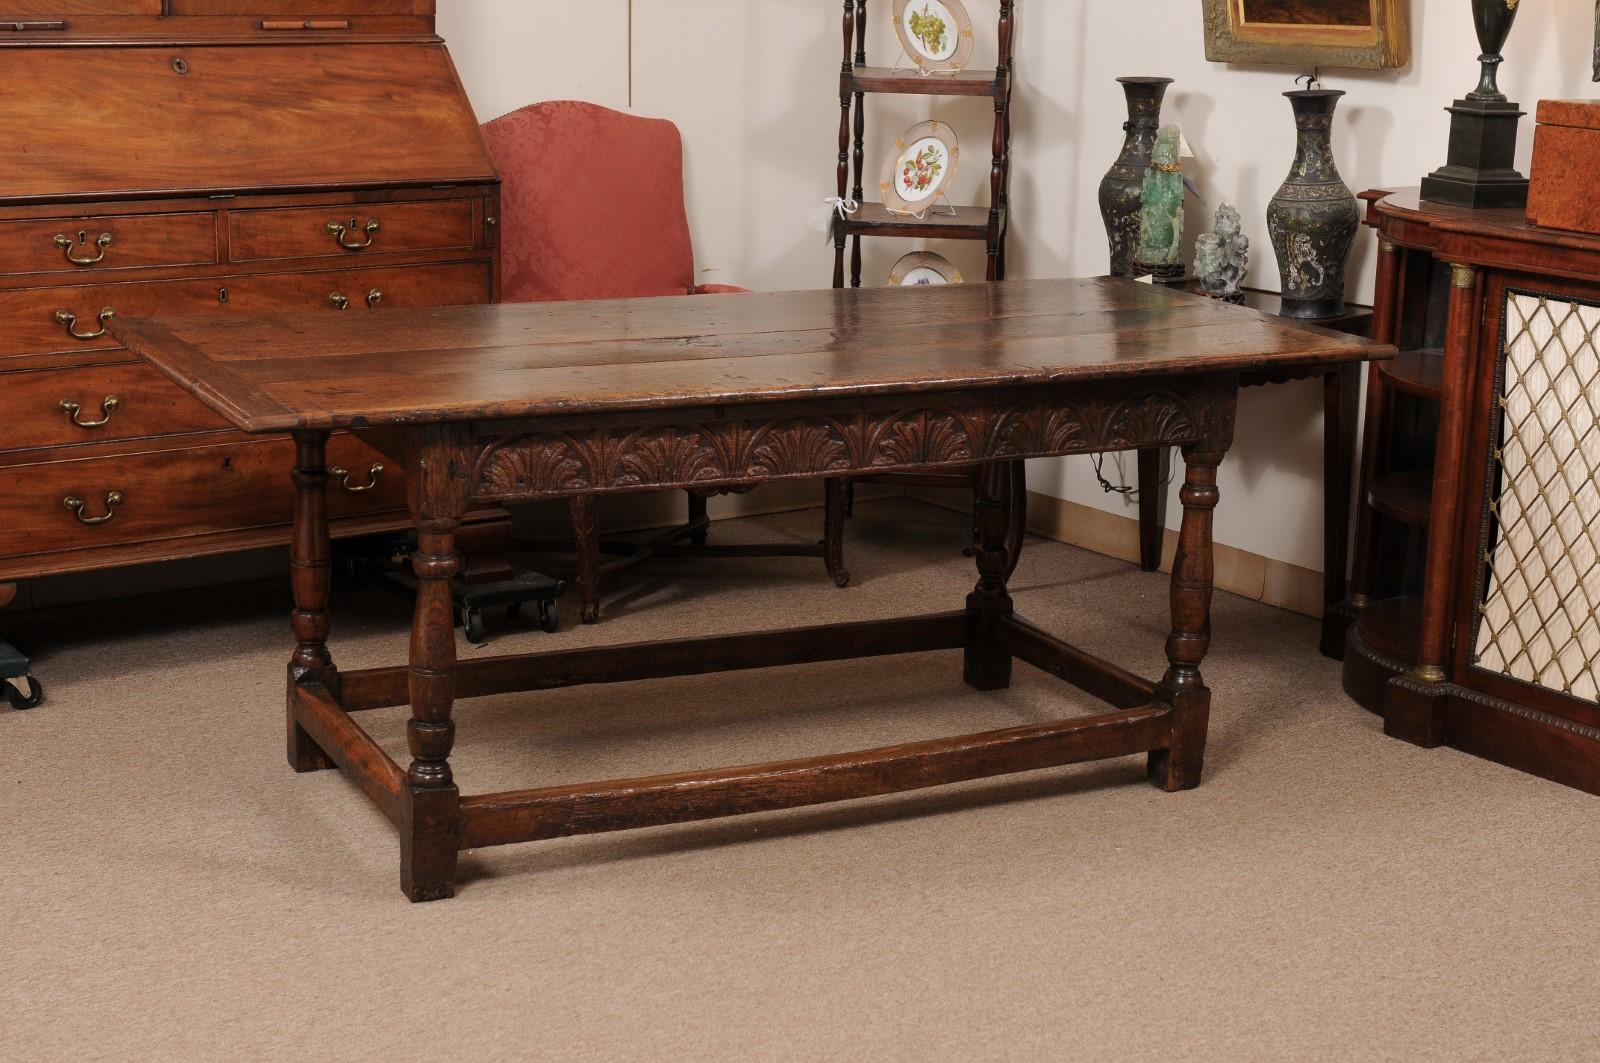  Early 18th Century English Long Oak Hall Table with Carved Frieze, Turned Legs  For Sale 6